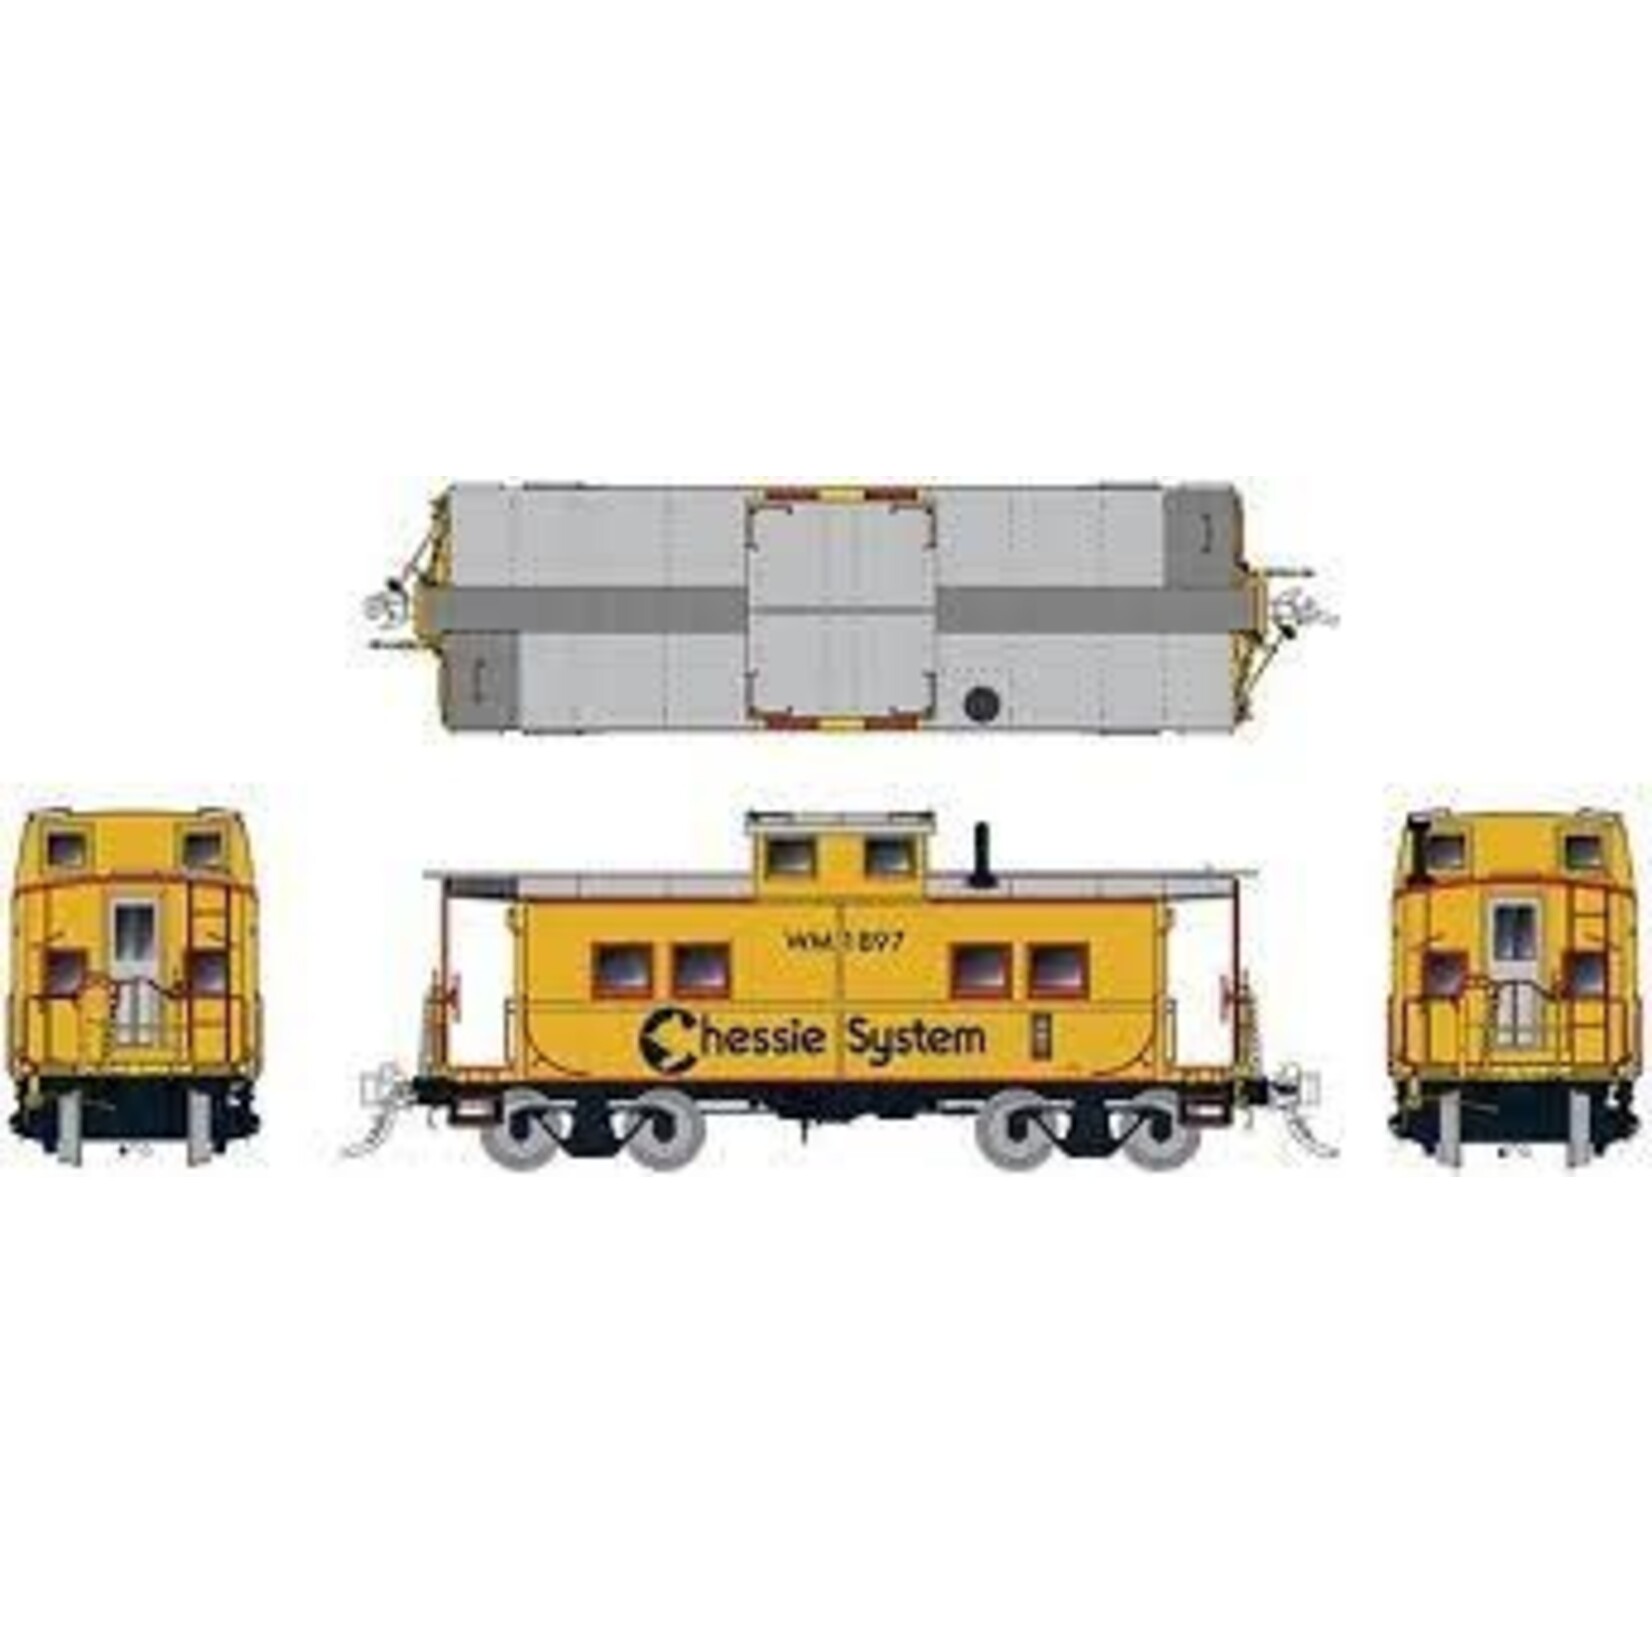 Rapido Trains Inc HO NE-style Steel Caboose: Chessie System: #1869